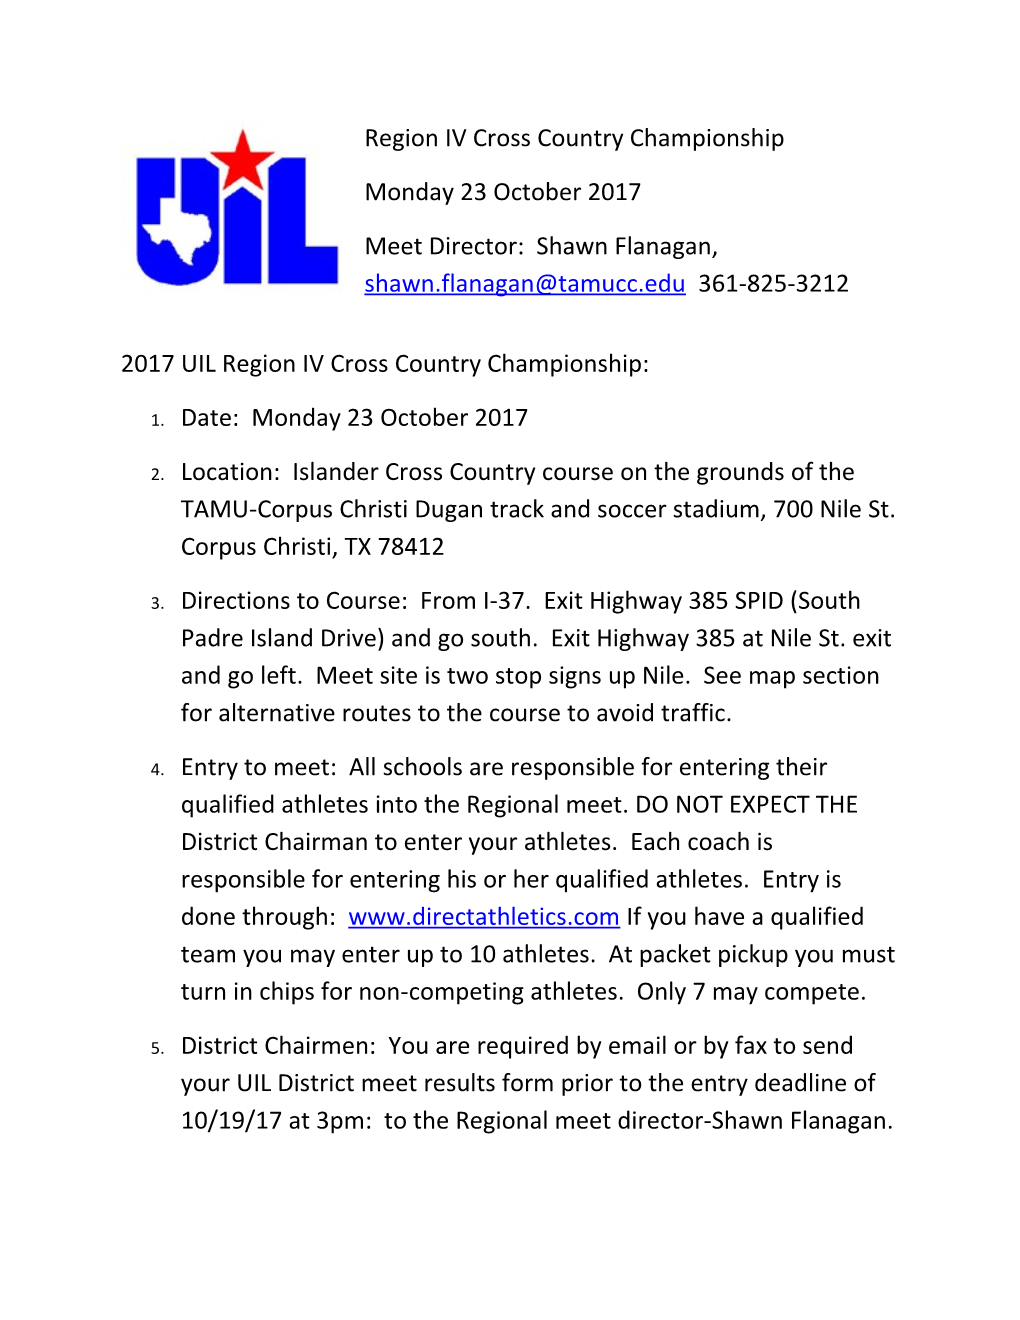 2017 UIL Region IV Cross Country Championship